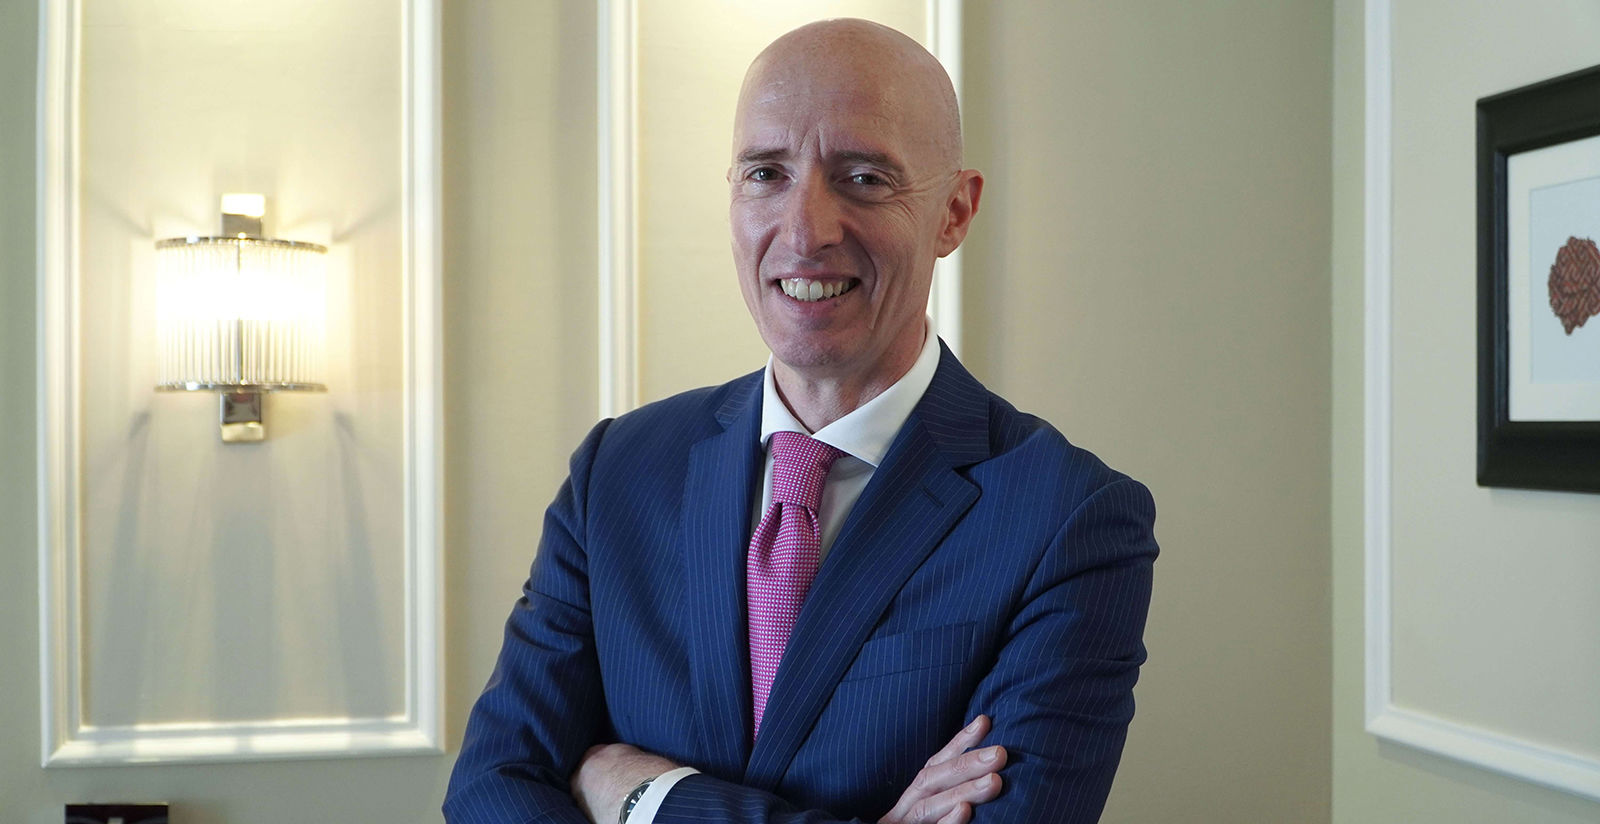 Interview with Claudio Catani, Vice President Operations of the FH55 Hotels Group 1